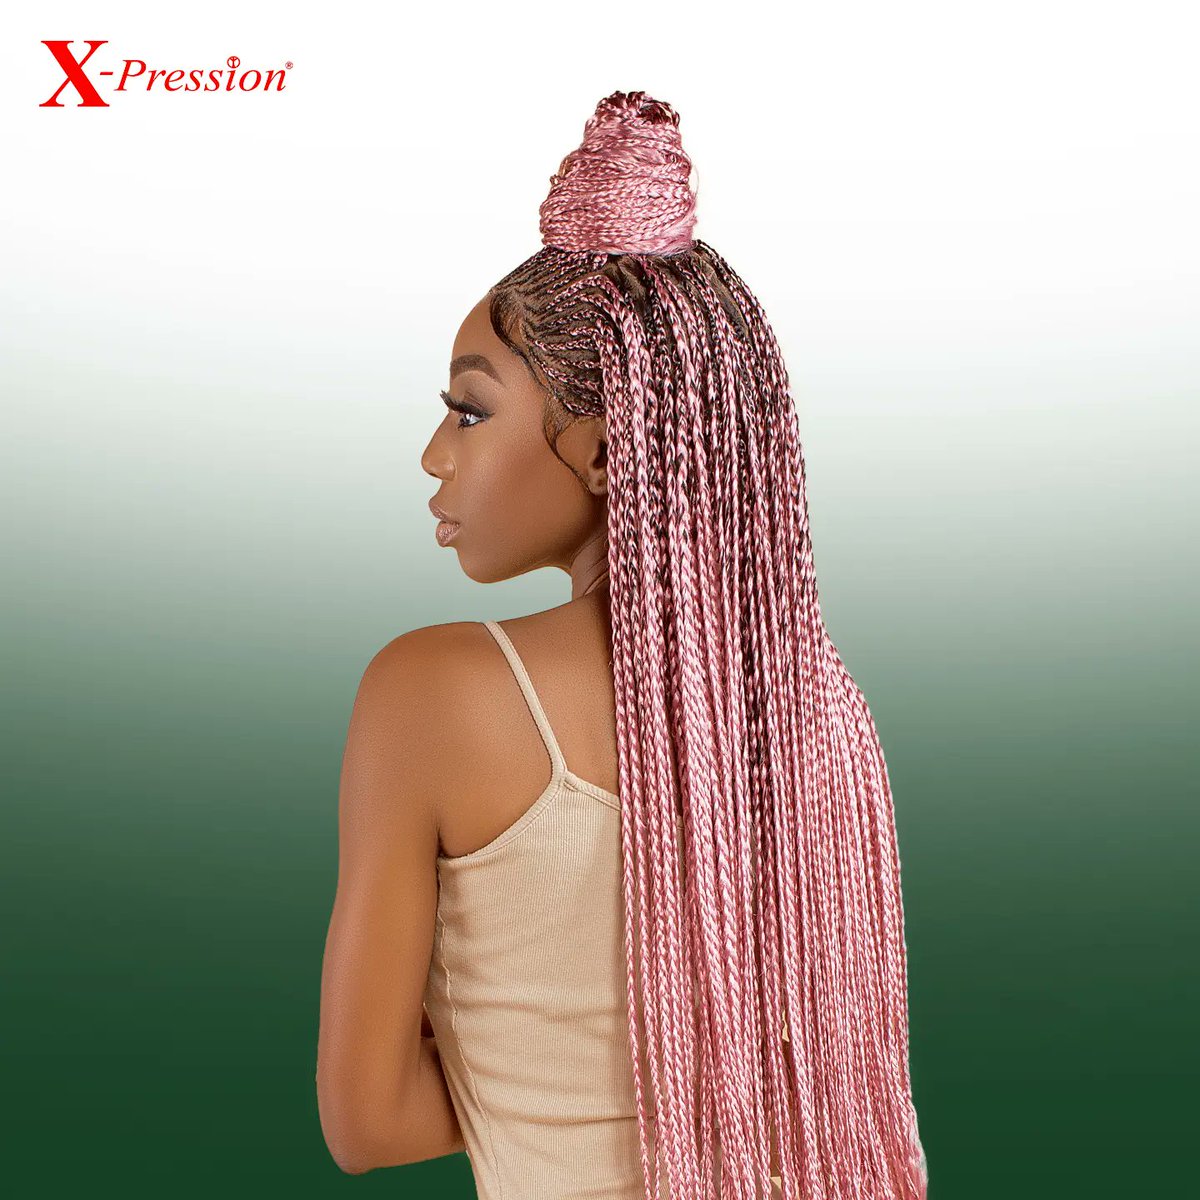 Transform your weekend look with the effortlessly chic RICH Braid - the epitome of style and sophistication. Whether you’re brunching with friends or strolling through the city, this braid adds an extra touch of glam to any ensemble. #xpression #xpressionhair #richbraid